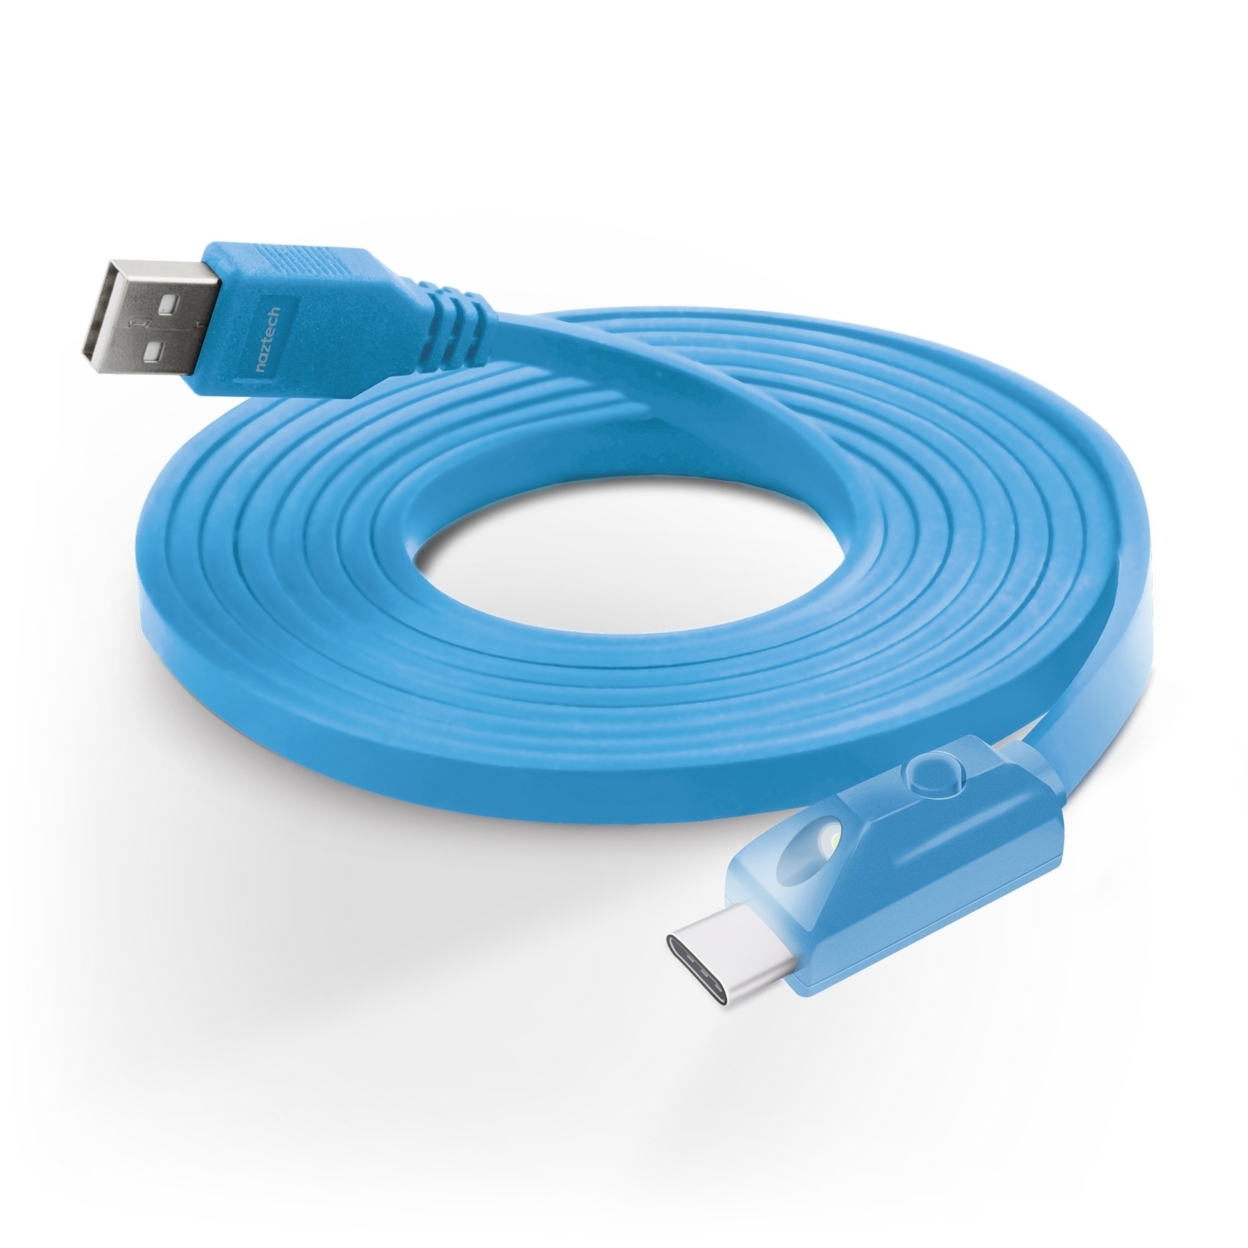 Naztech LED USB-A To USB-C 2.0 Charge & Sync Cable 6ft (USBCABLE8-PRNT) - Blue